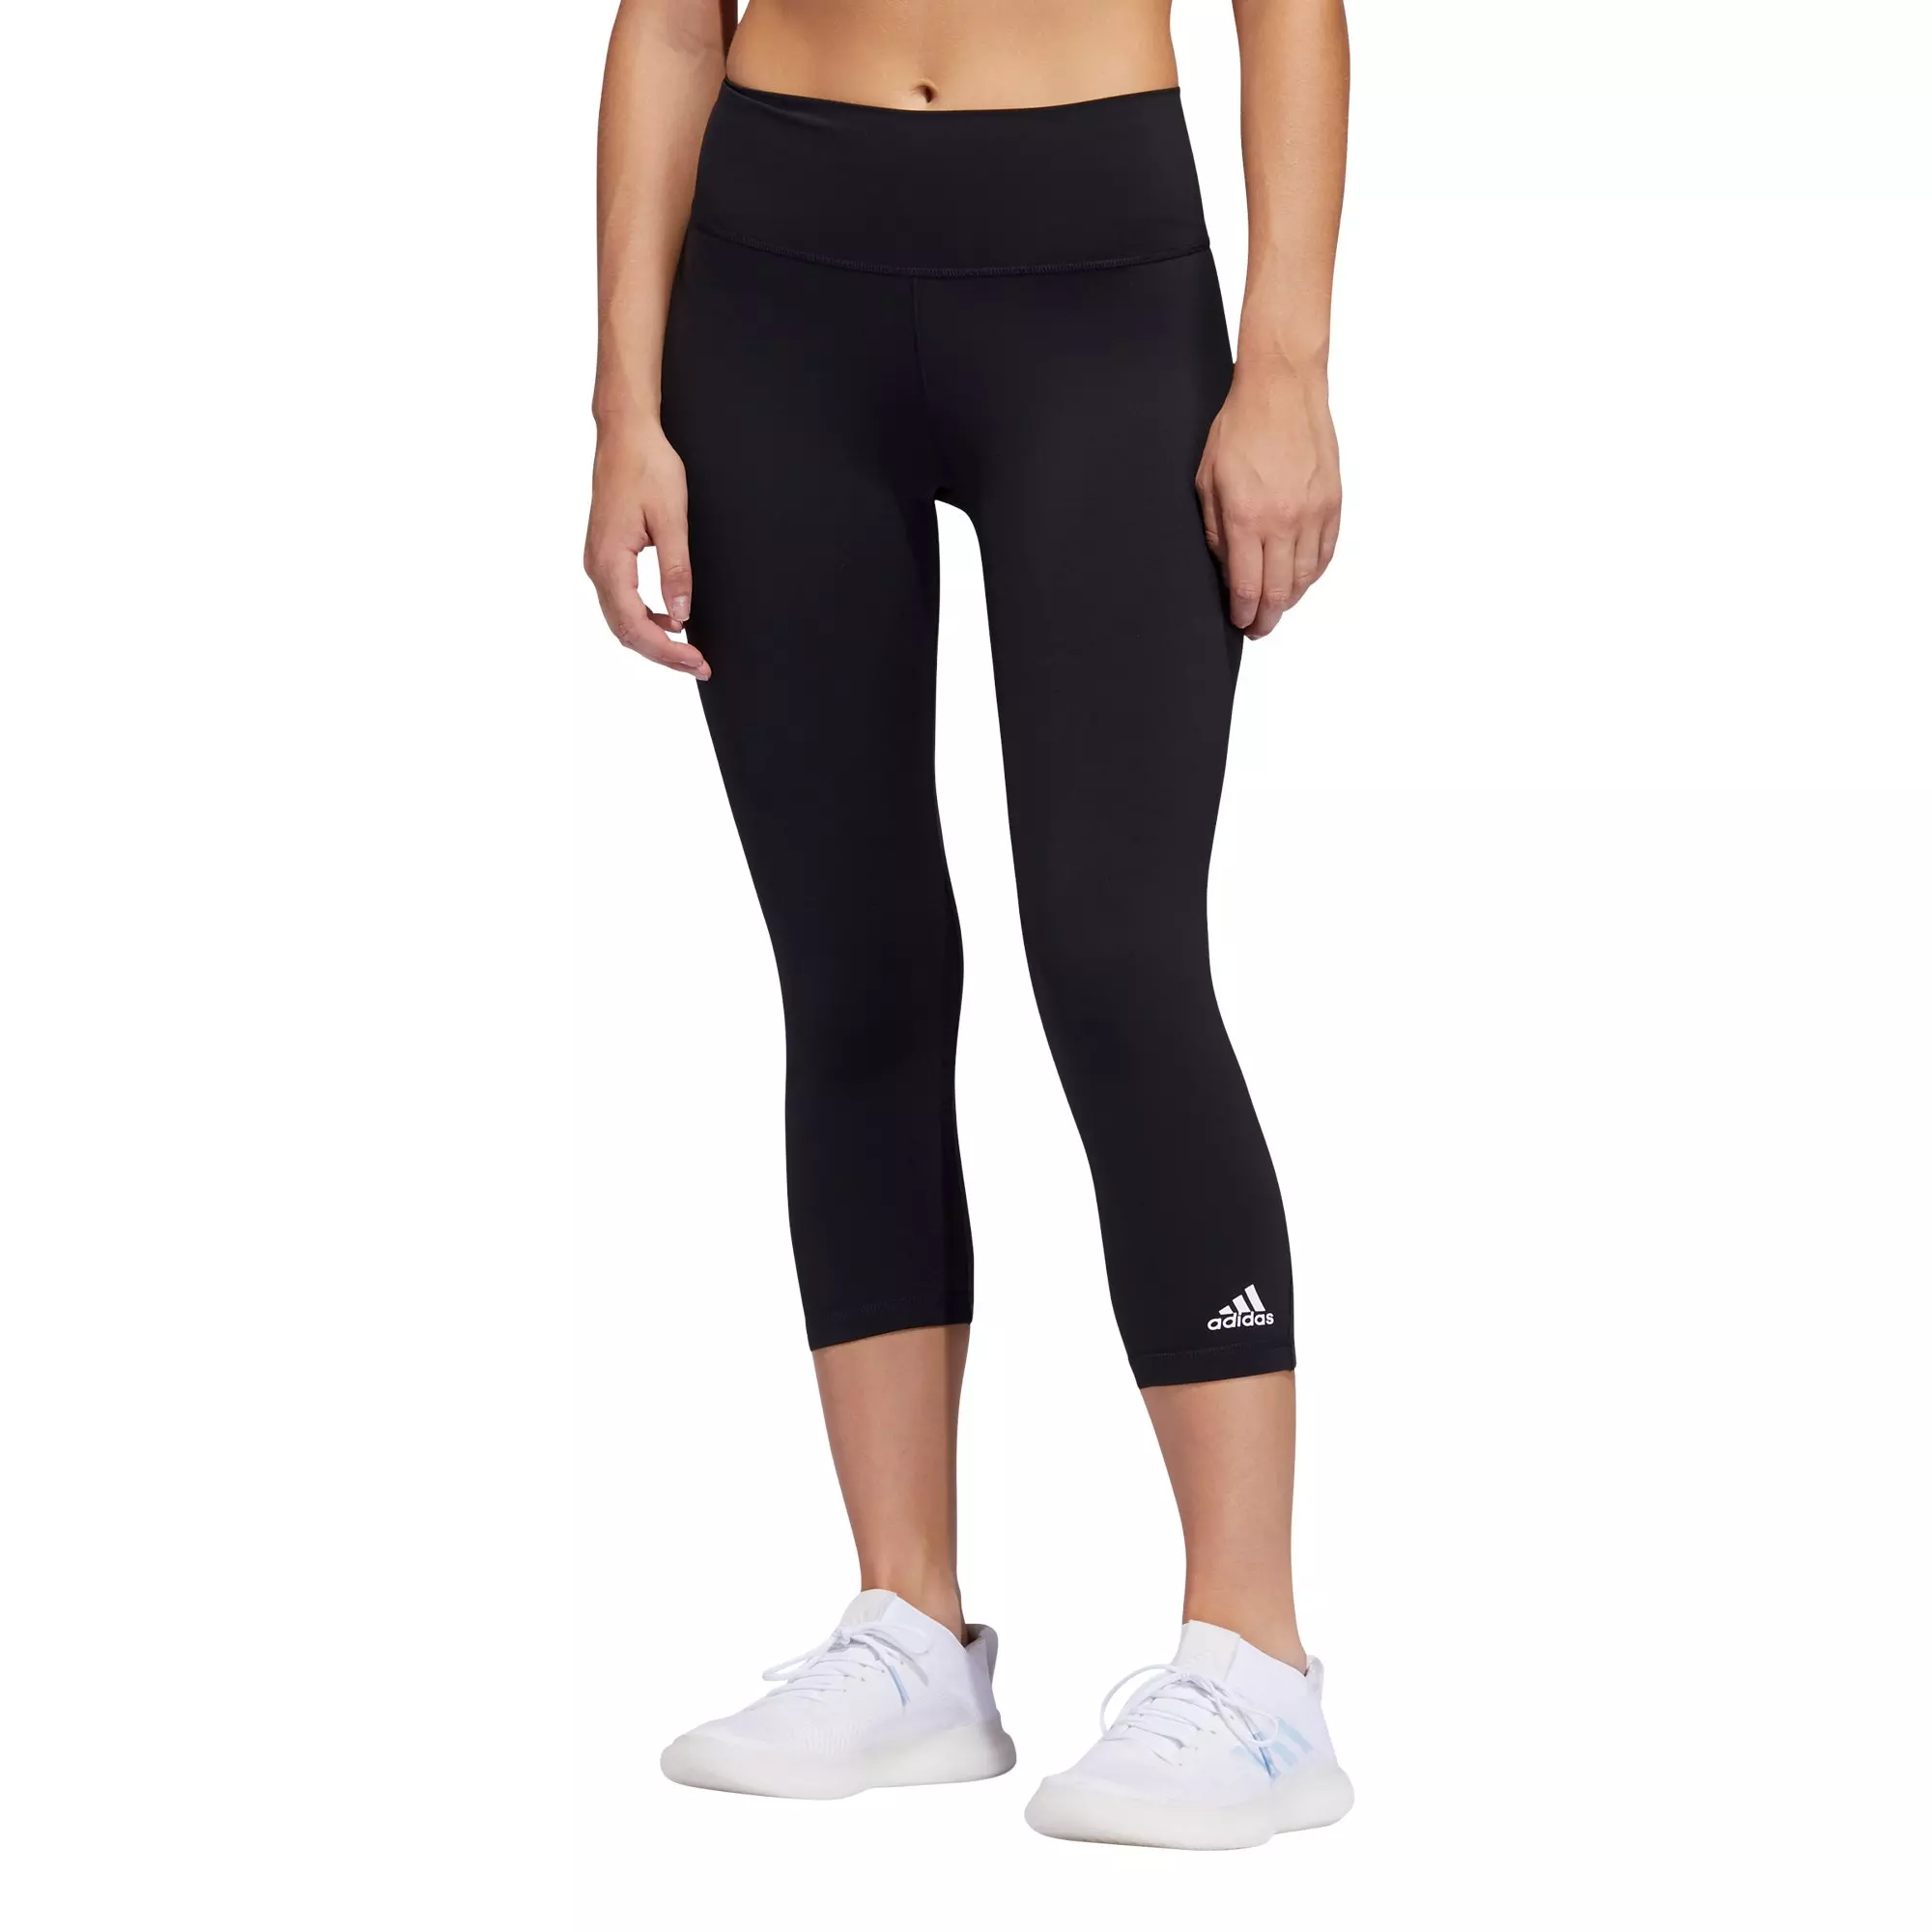 ADIDAS Women's Believe This 2.0 Perfect Long Compression Leggings NWT Size  SMALL